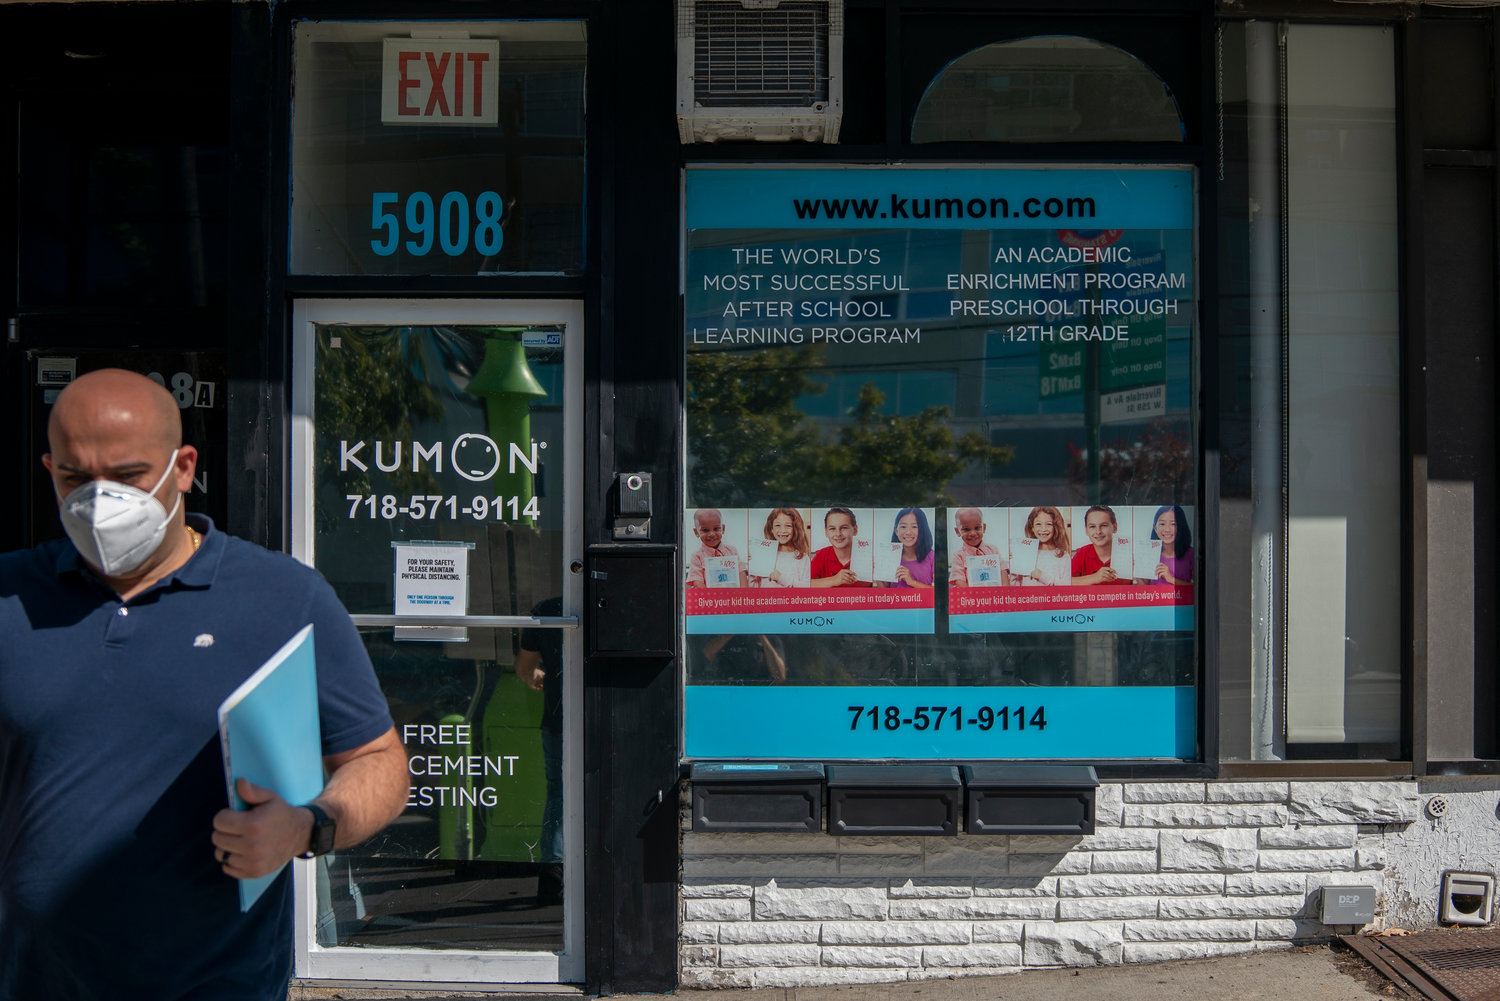 While Mathnasium may have closed, another academic support center on Riverdale Avenue — Kumon — remains open. Kumon moved into smaller digs next door, but it’s actually seeing more scheduled sessions as a result of the challenges of hybrid and remote learning.